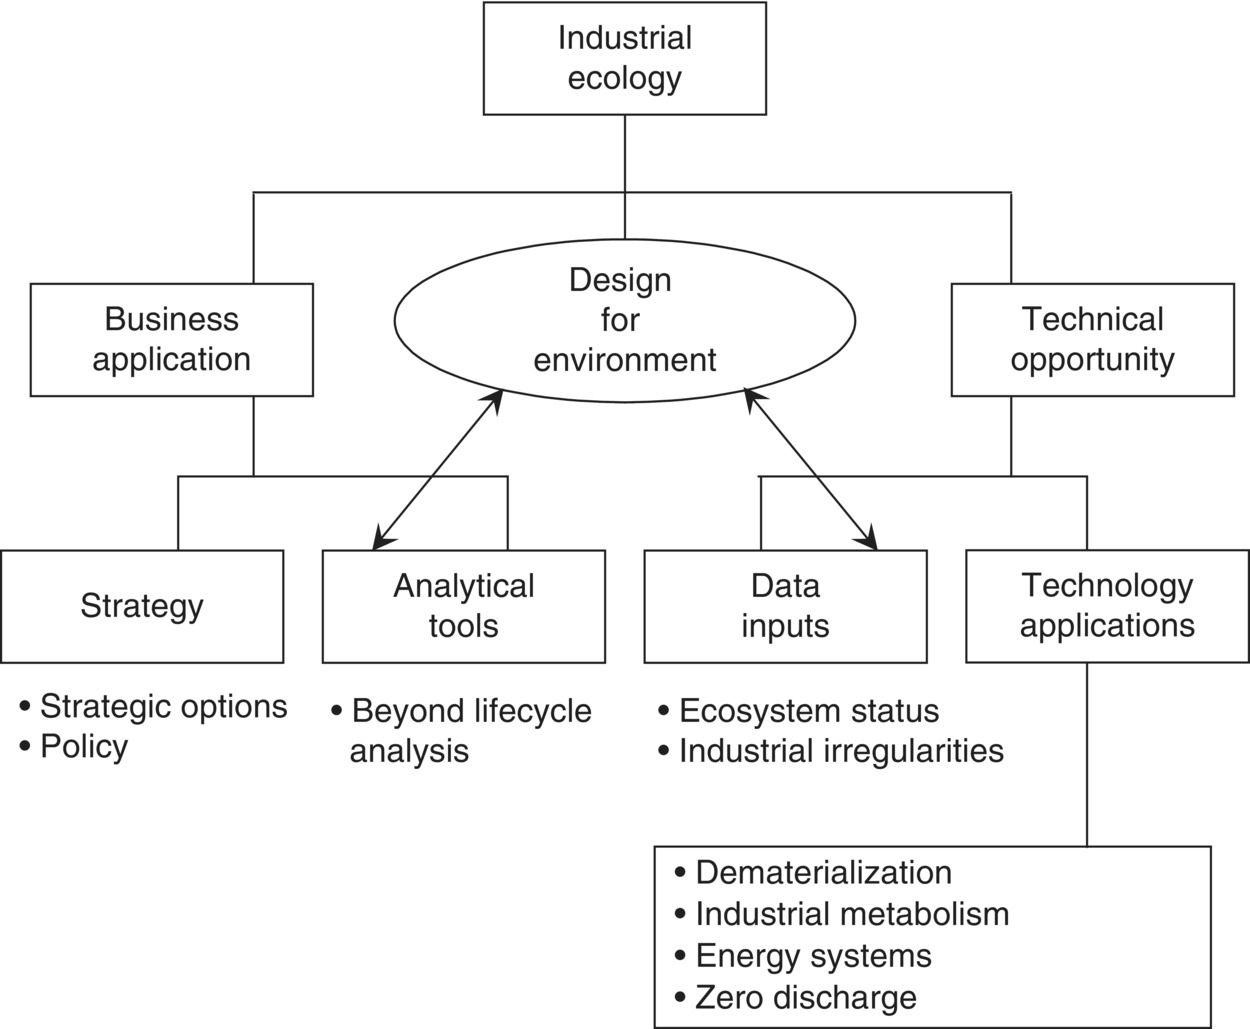 Flow diagram displaying a box at the top labeled Industrial ecology branching to an ellipse labeled Design for environment and 2 boxes labeled Business application and Technical opportunity, etc.